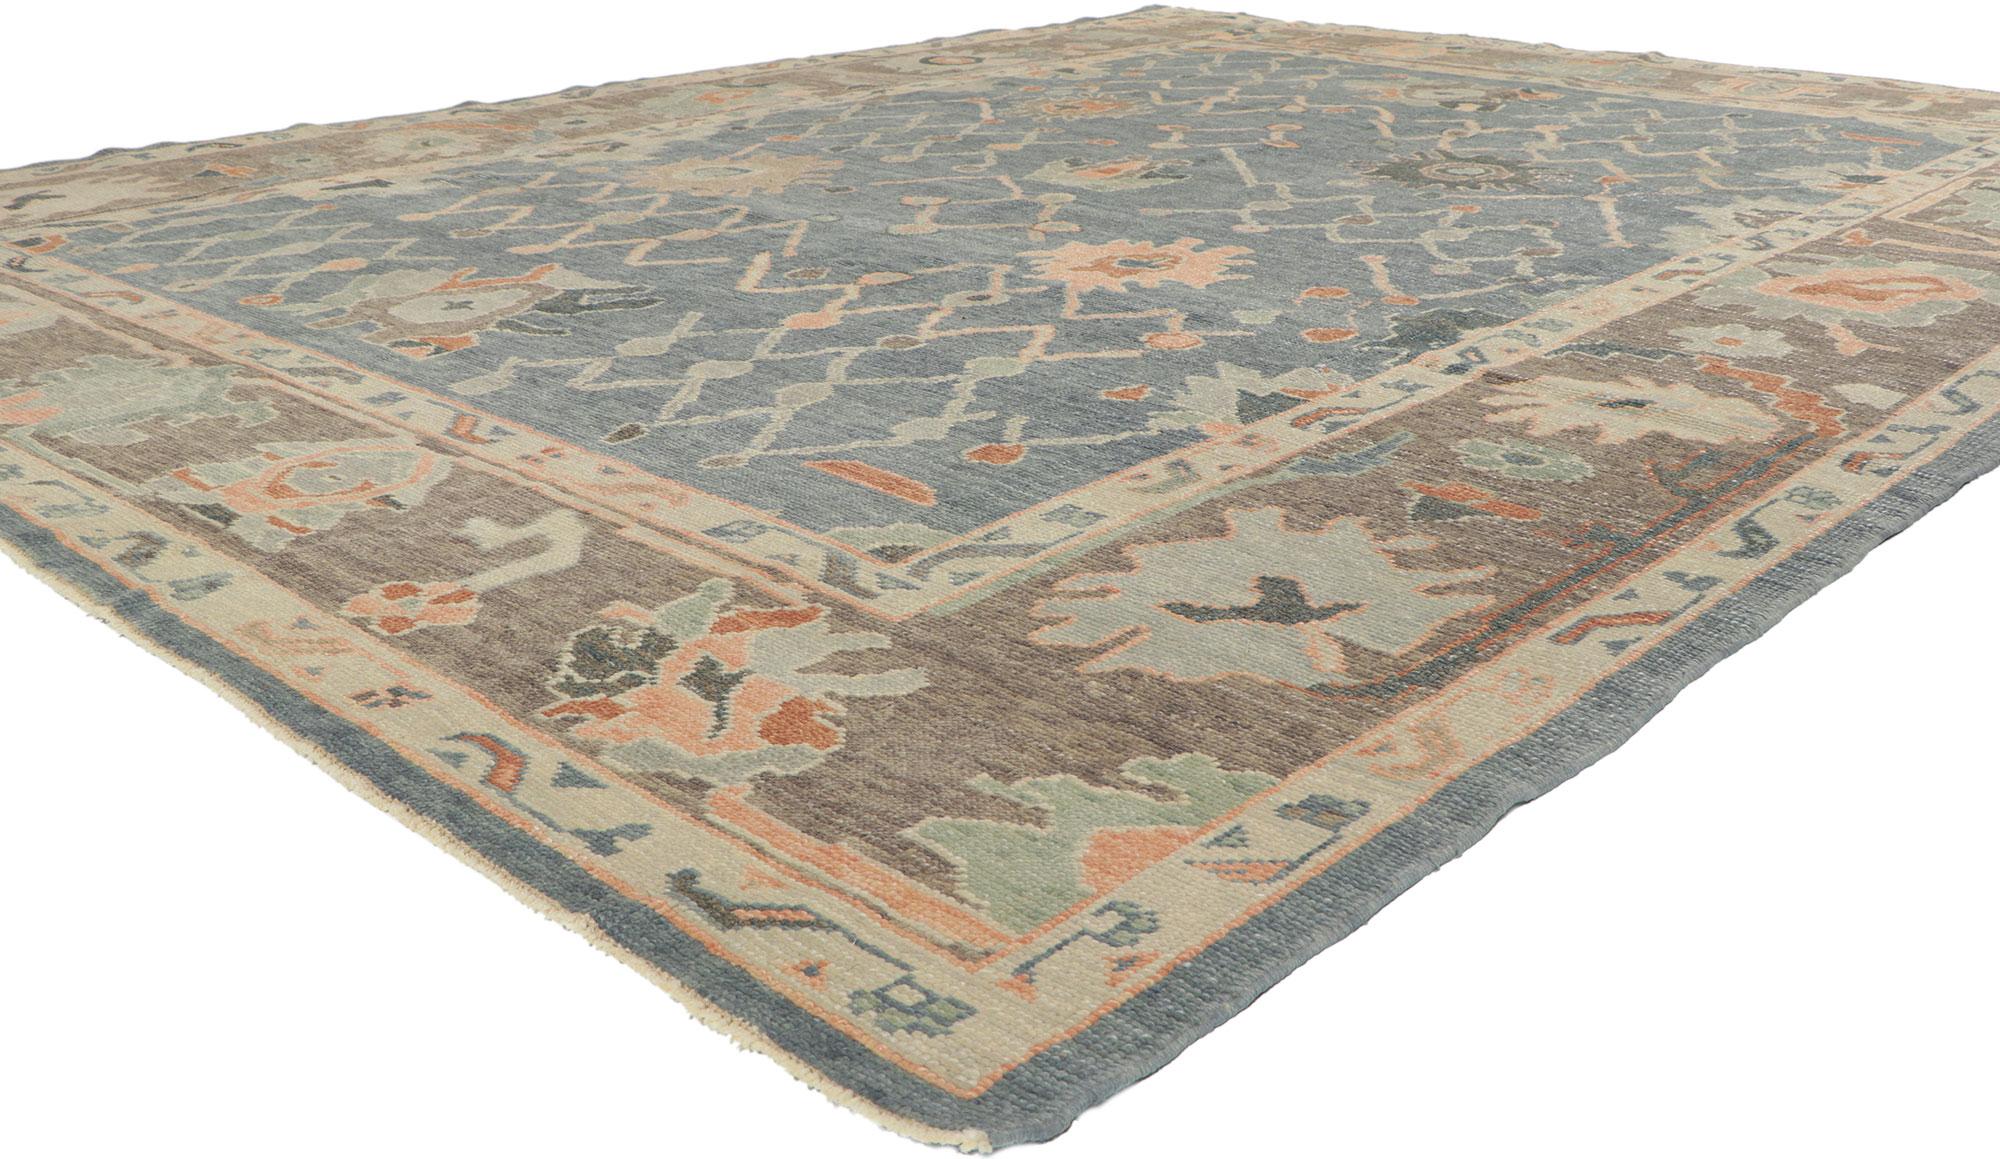 ​53817 Modern Oushak Turkish Rug, 09'03 x 12'02.
Contemporary elegance meets global chic in this hand-knotted wool modern Turkish Oushak rug. Prepare to be enveloped in a cozy embrace as this modern Oushak rug infuses the contemporary world with a